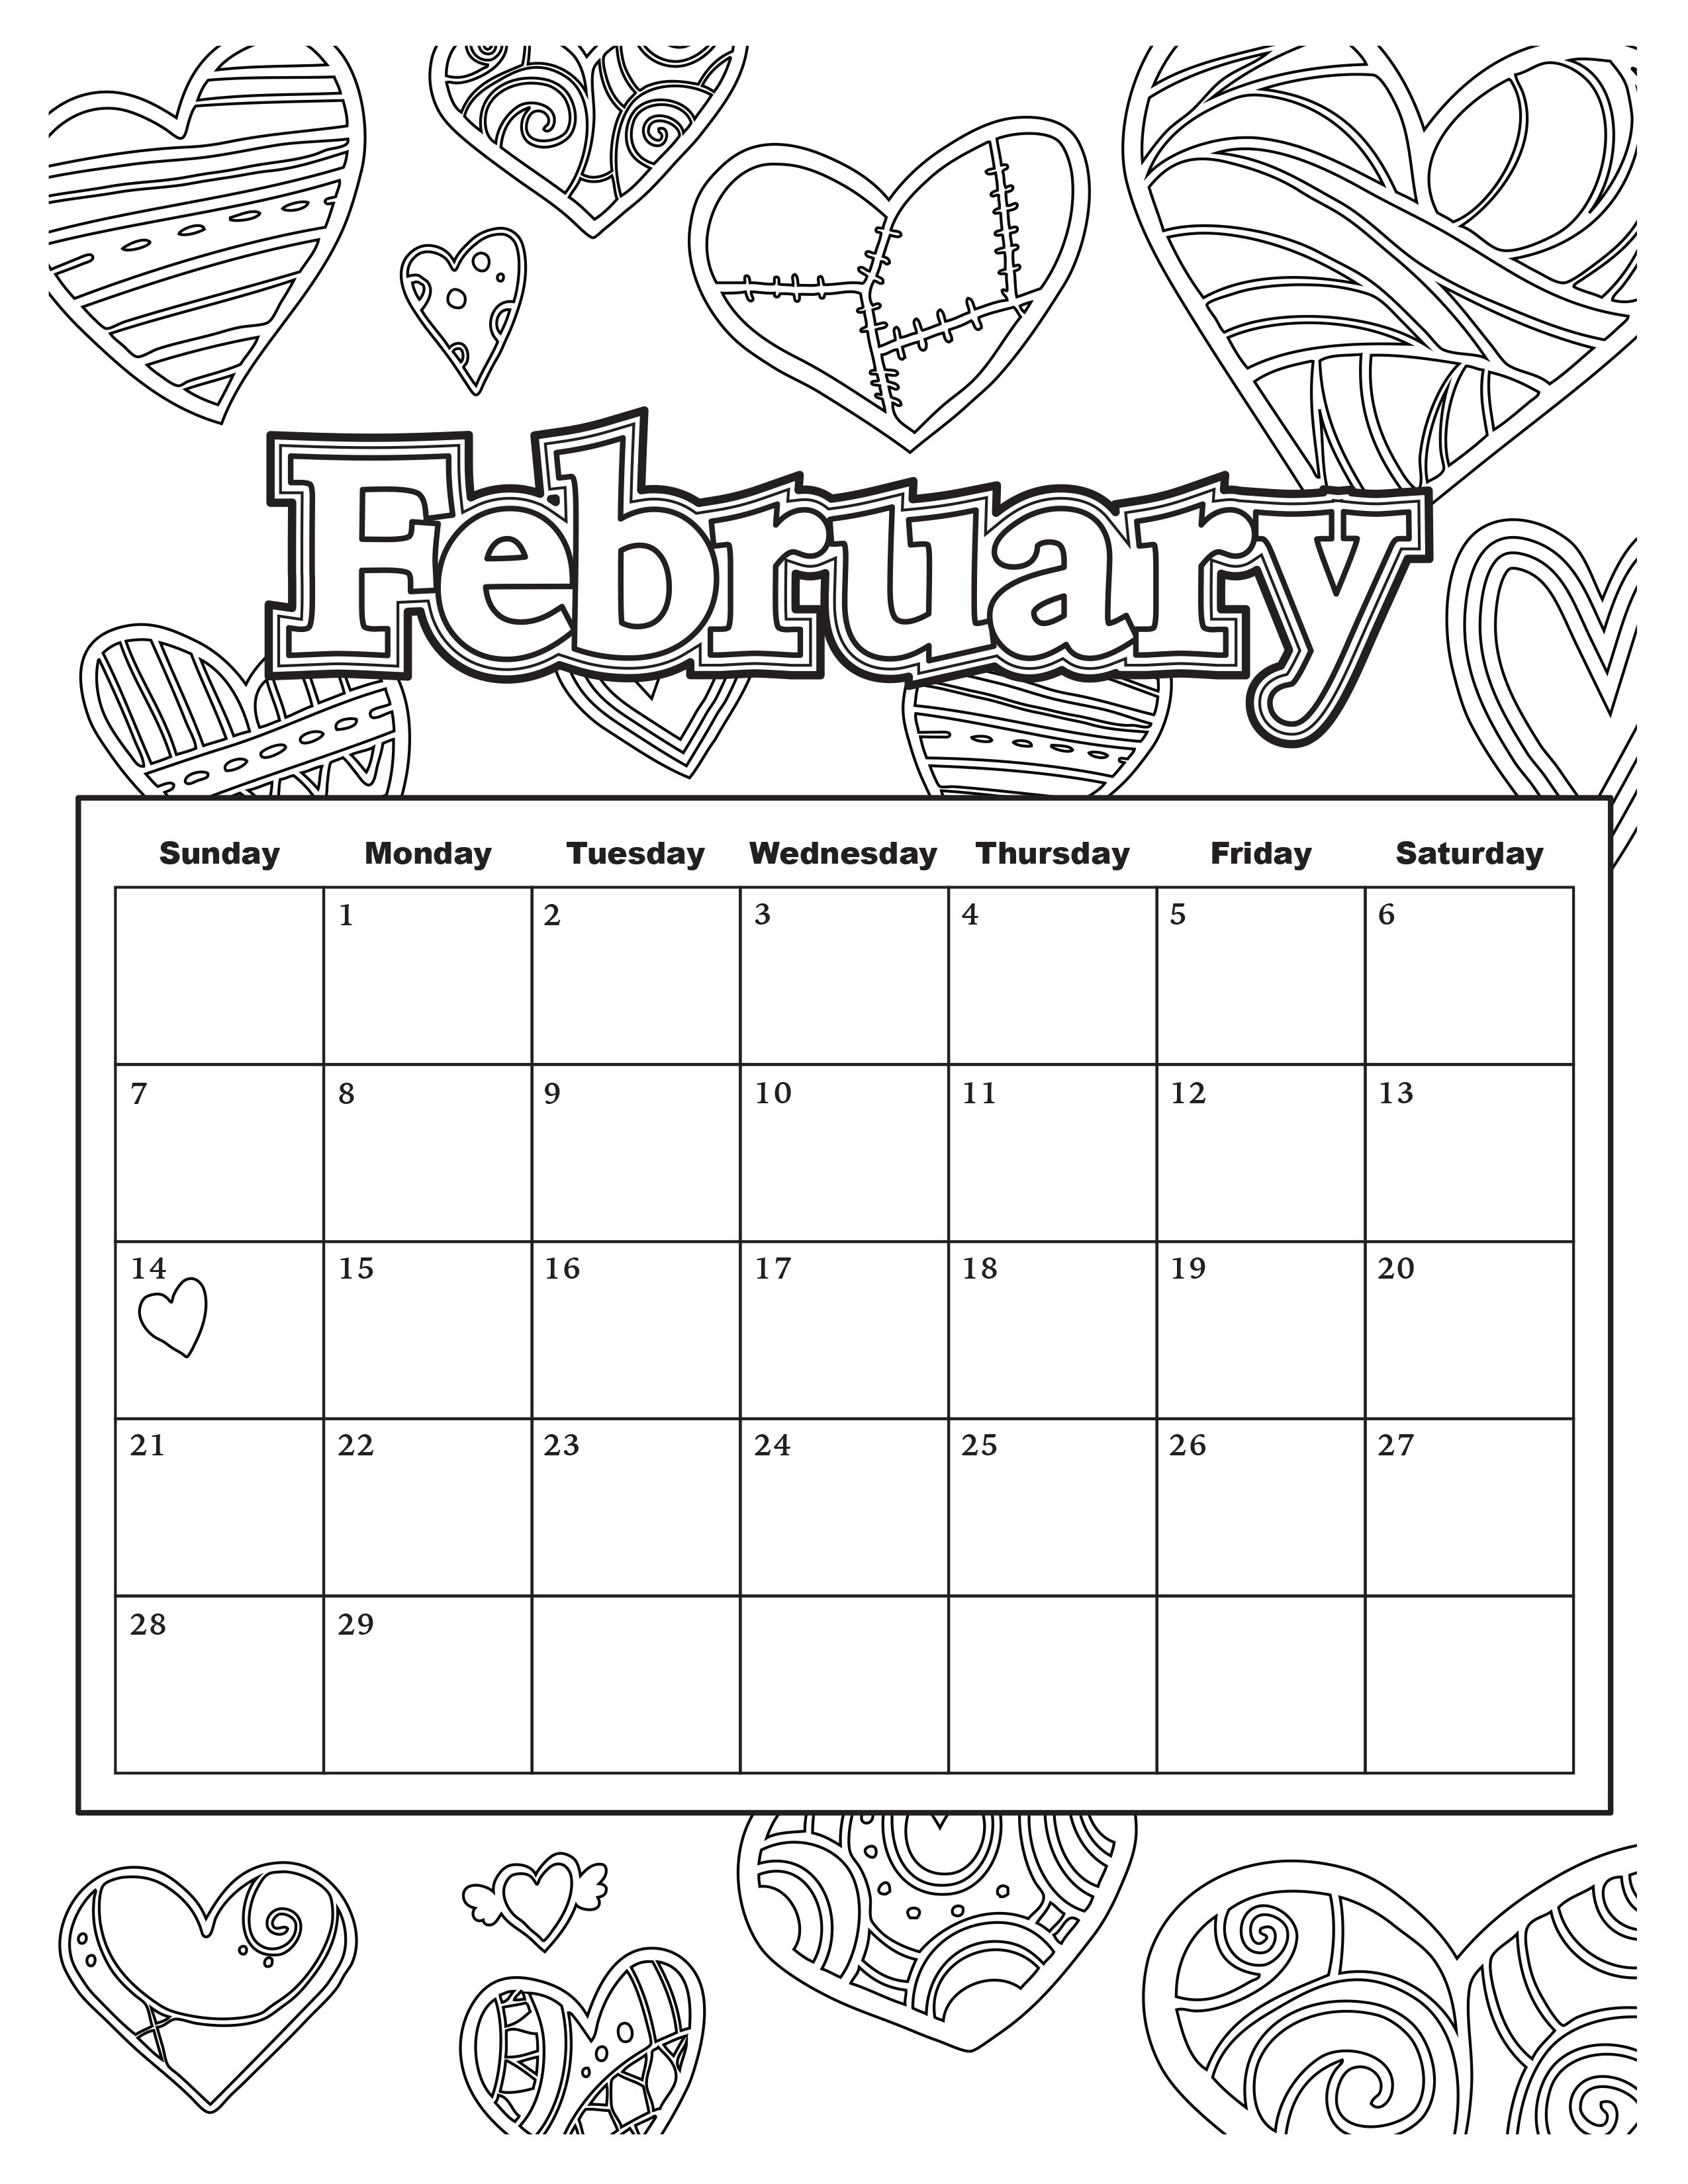 monthly-calendar-coloring-pages-download-and-print-for-free